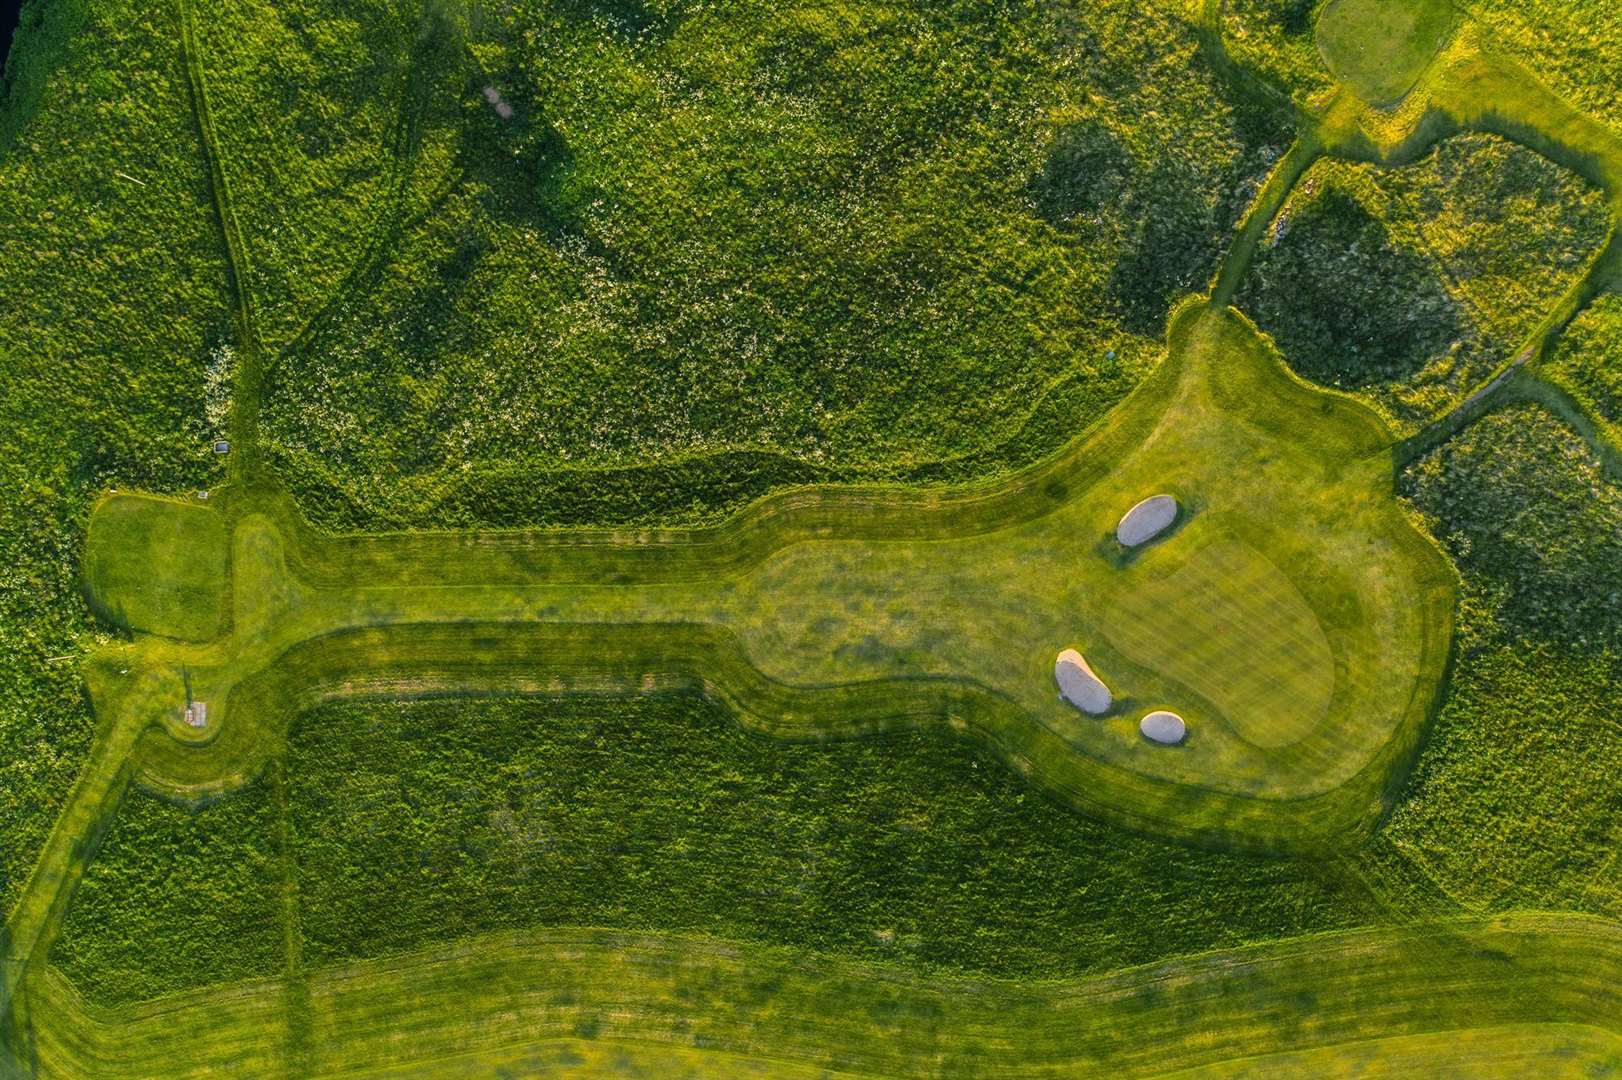 Reay Golf Club is hoping to include hole-by-hole flyovers on its website. Picture: Craig Macintosh / Highland Drones